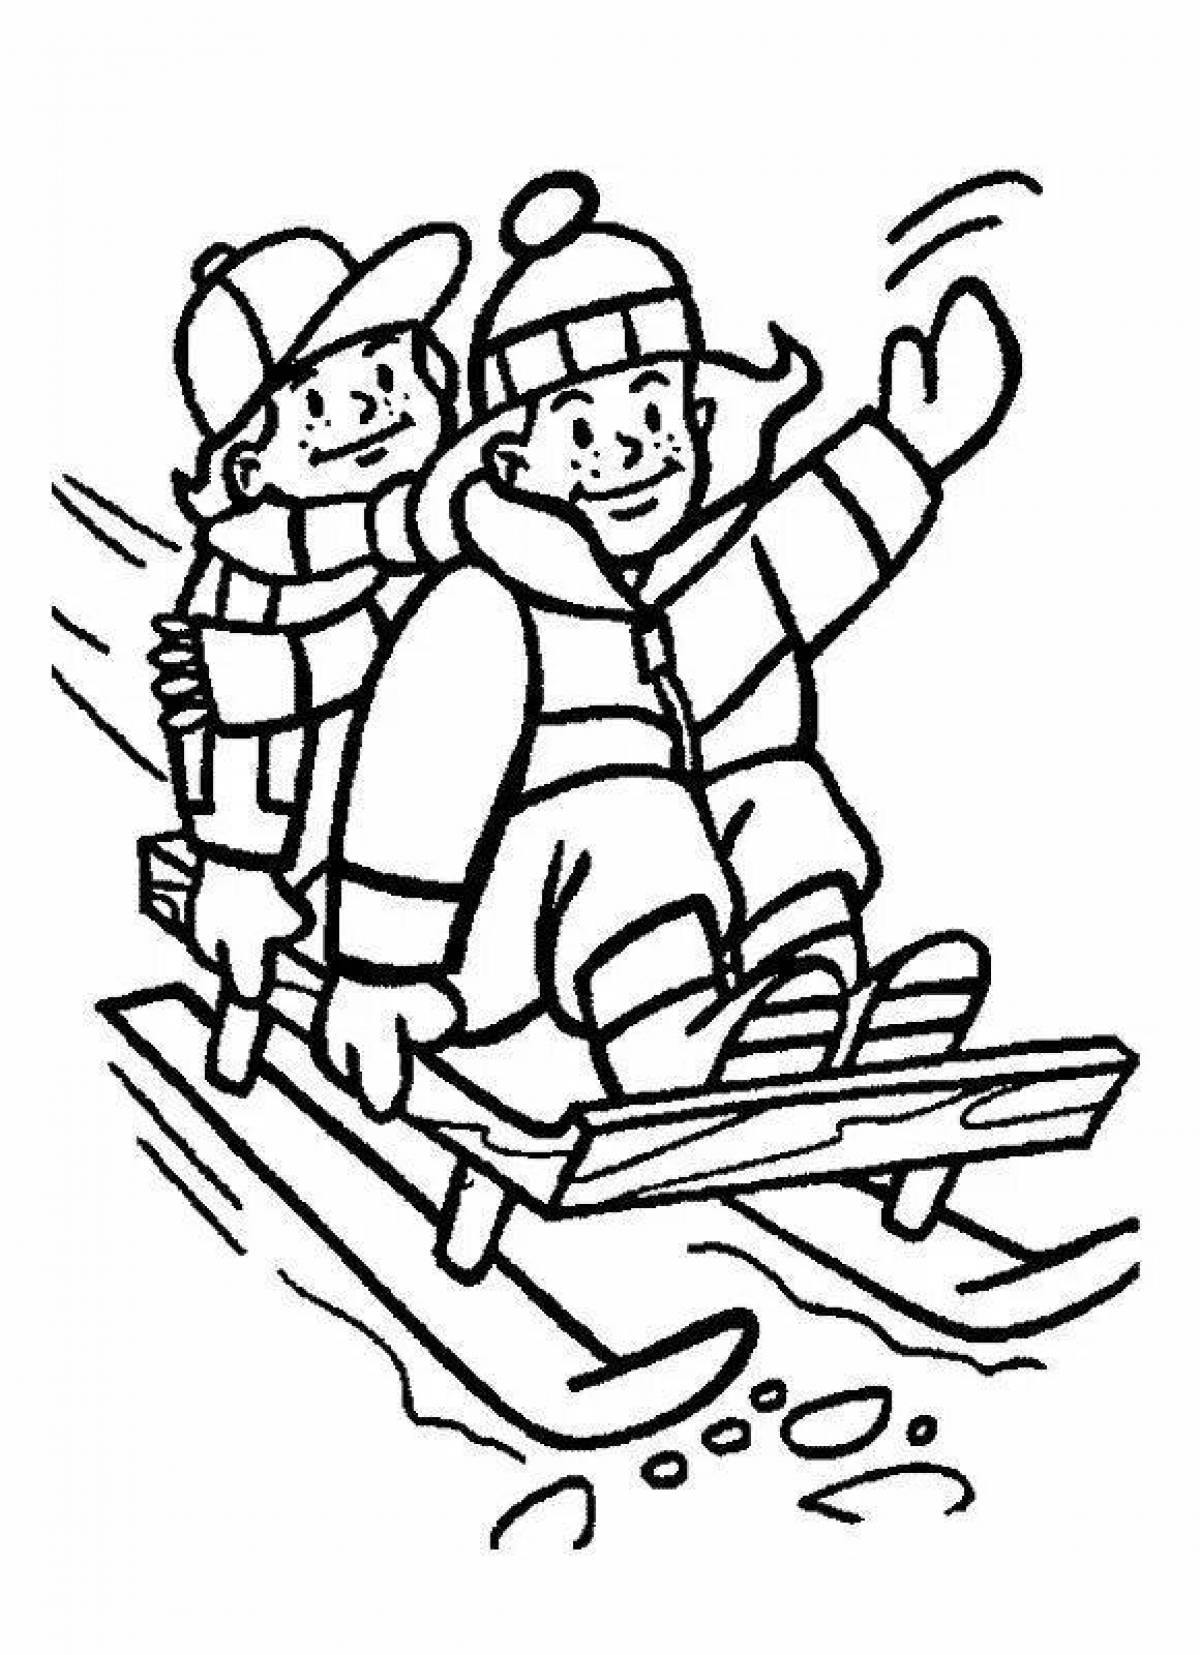 Coloring page of a living child on a sled